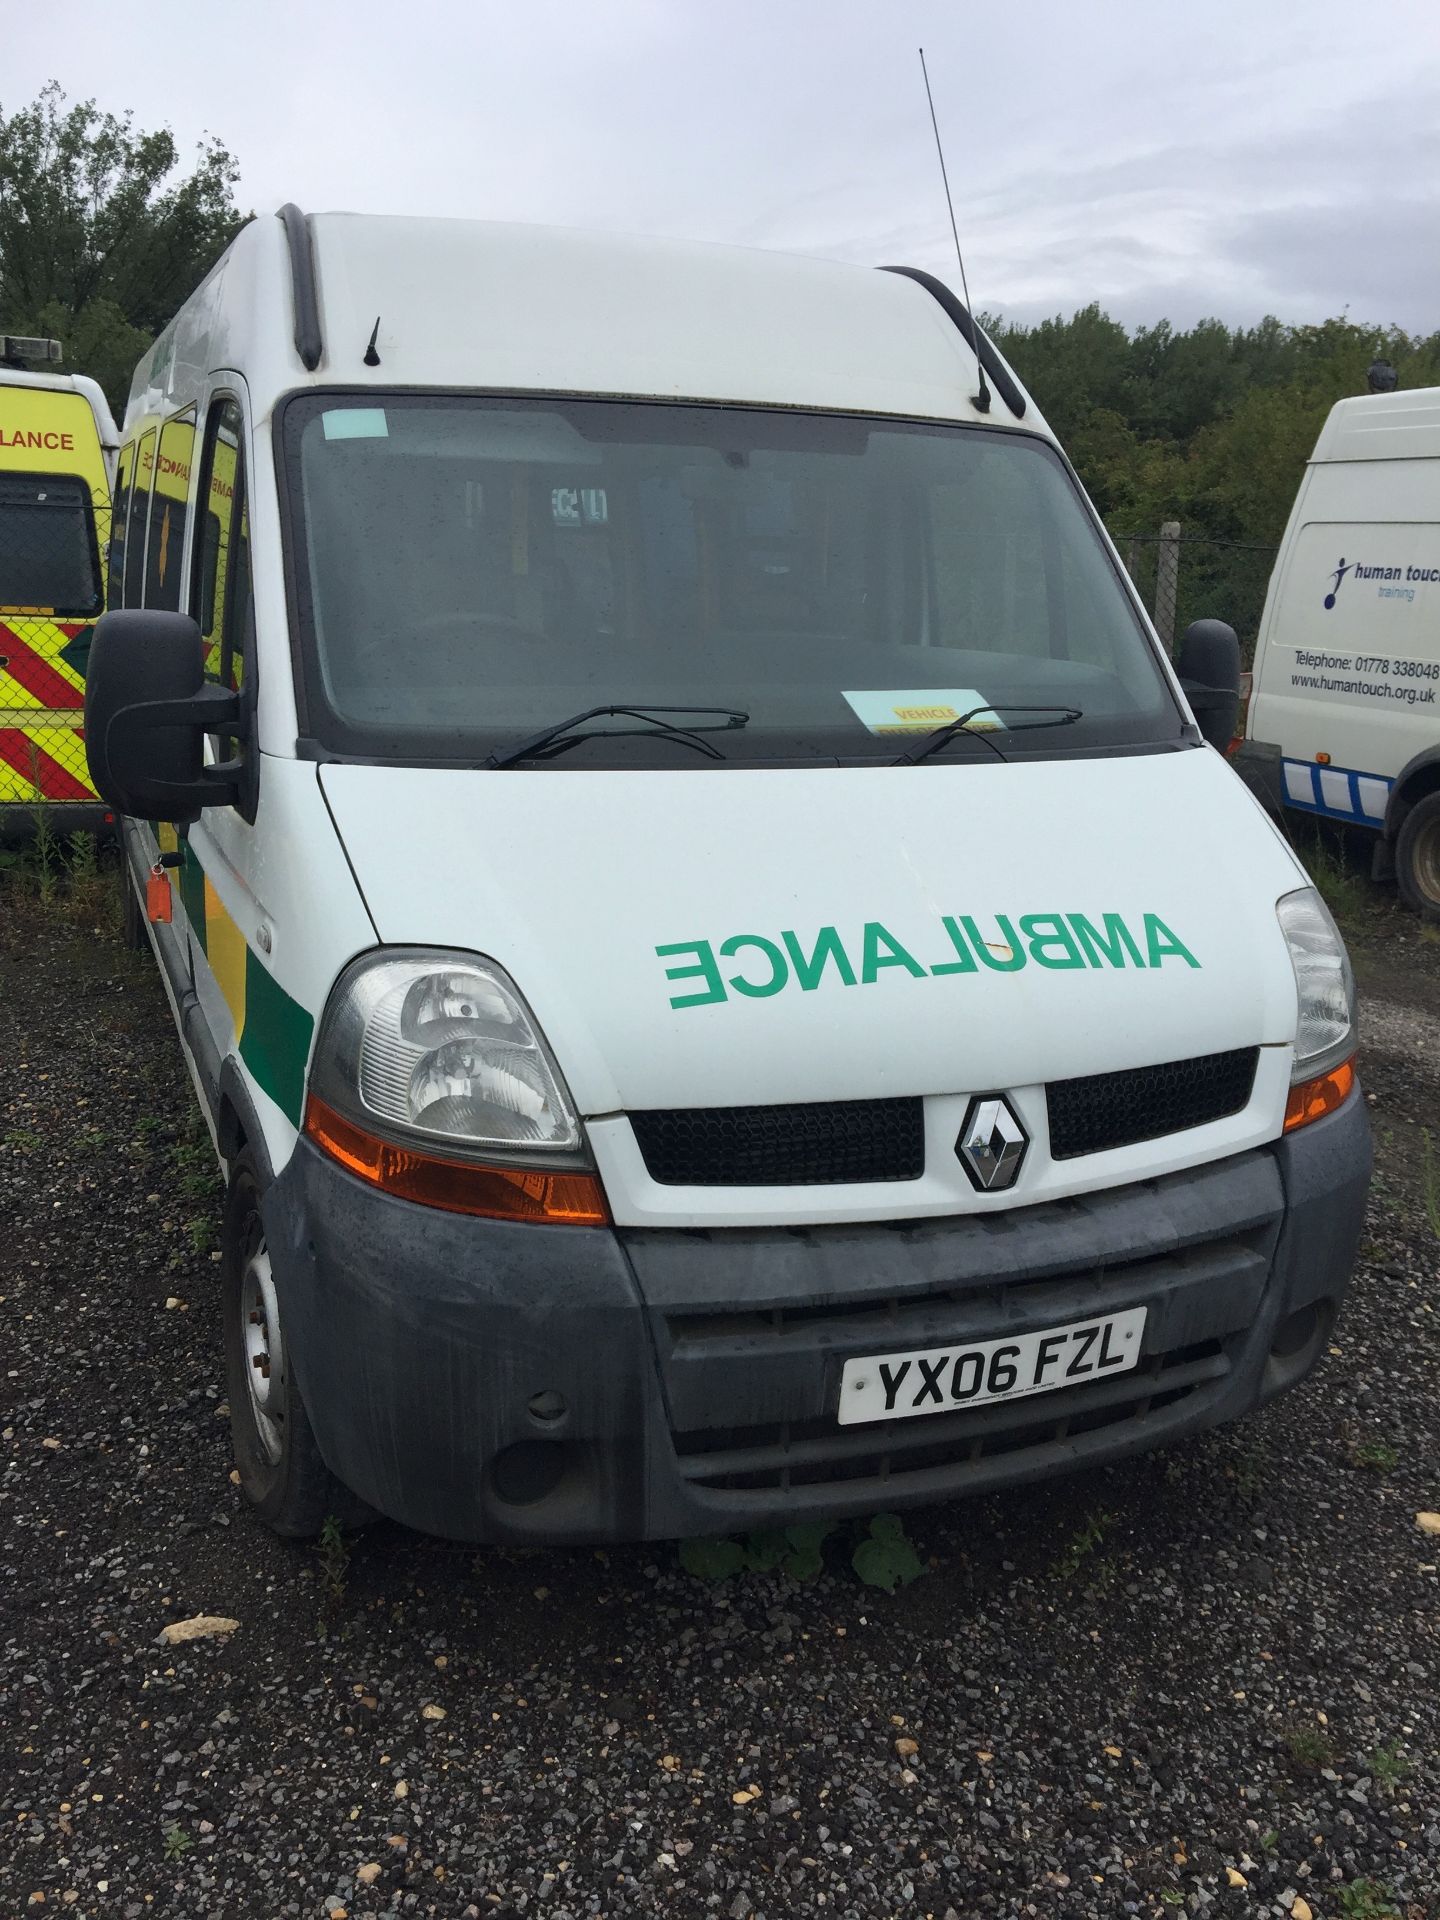 Renault Master standard body patient transfer ambulance Registration No YX06 XZL, recorded miles